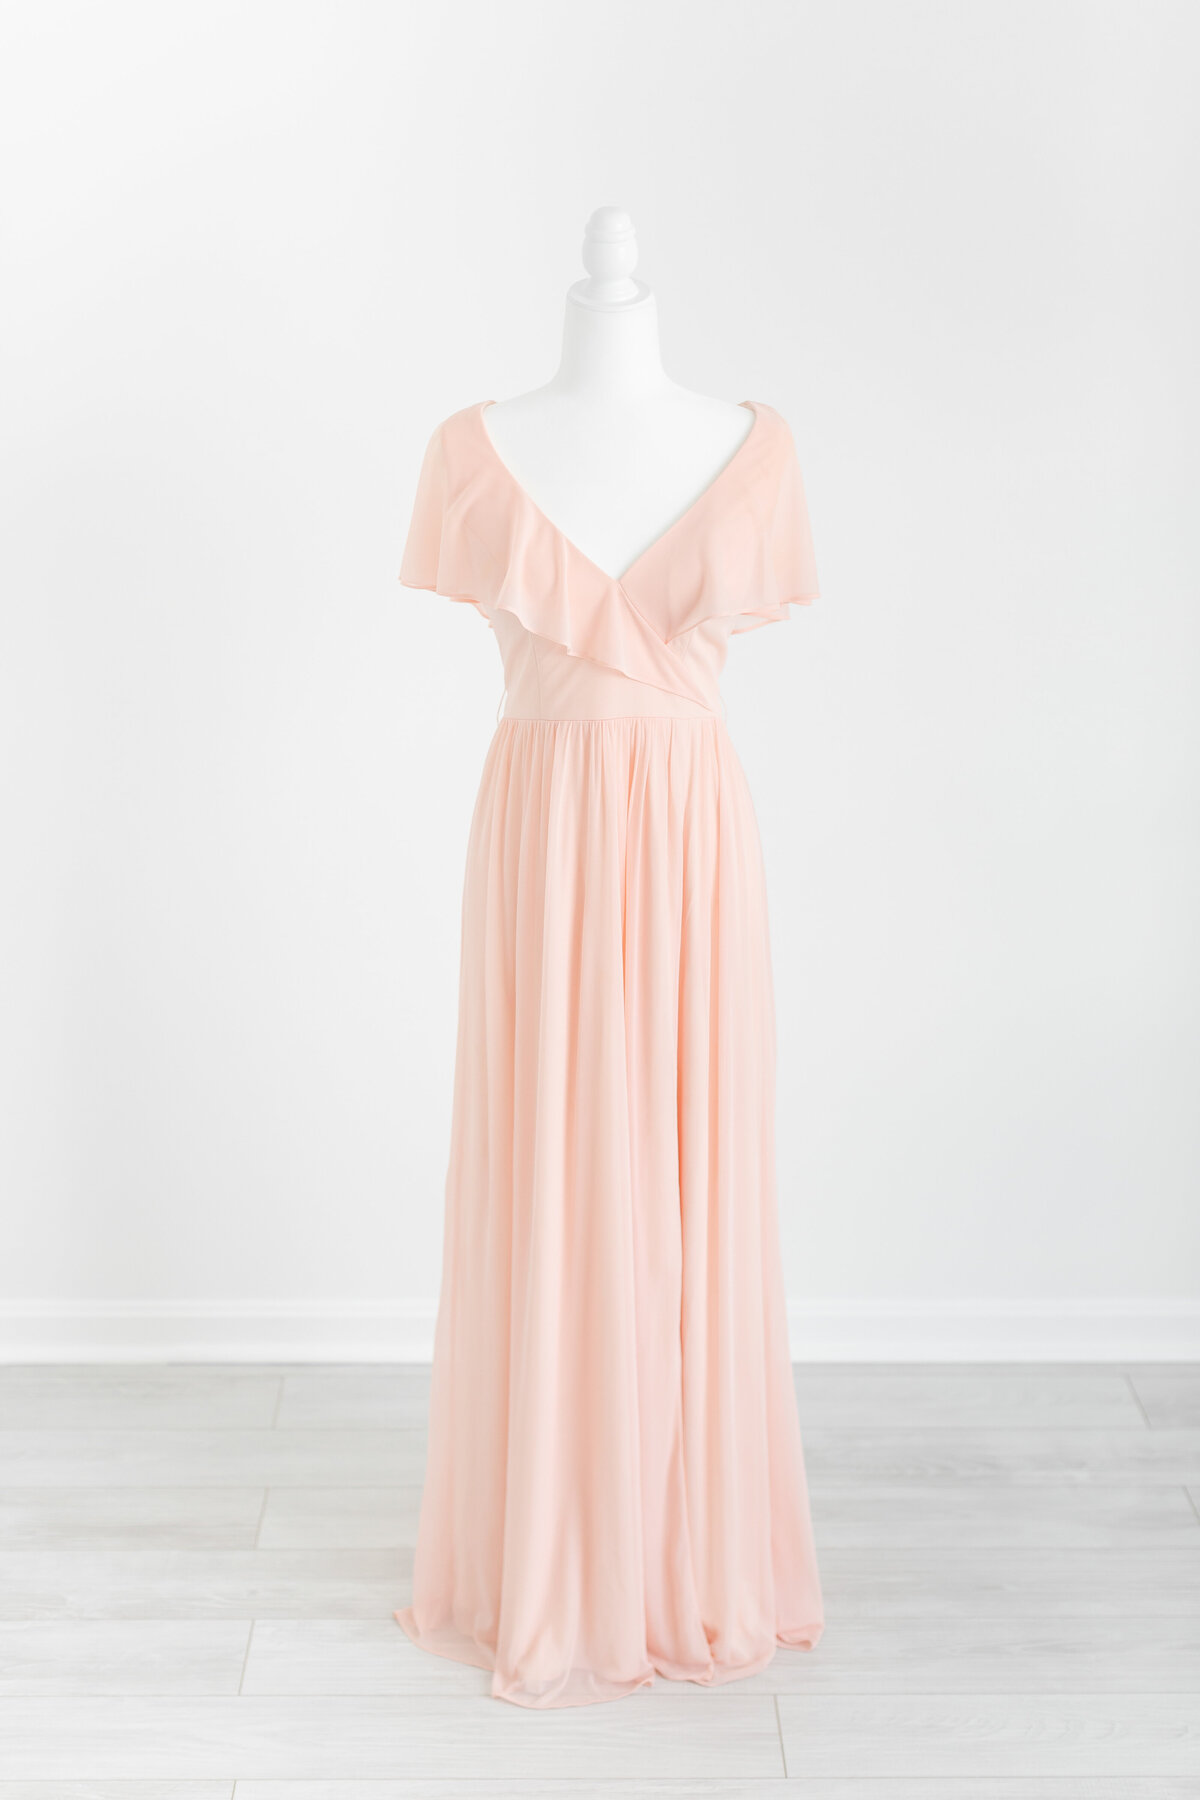 Peach maxi dress with a v neck and flutter sleeves by Washington DC Family PhotographerWashington DC Family Photographer